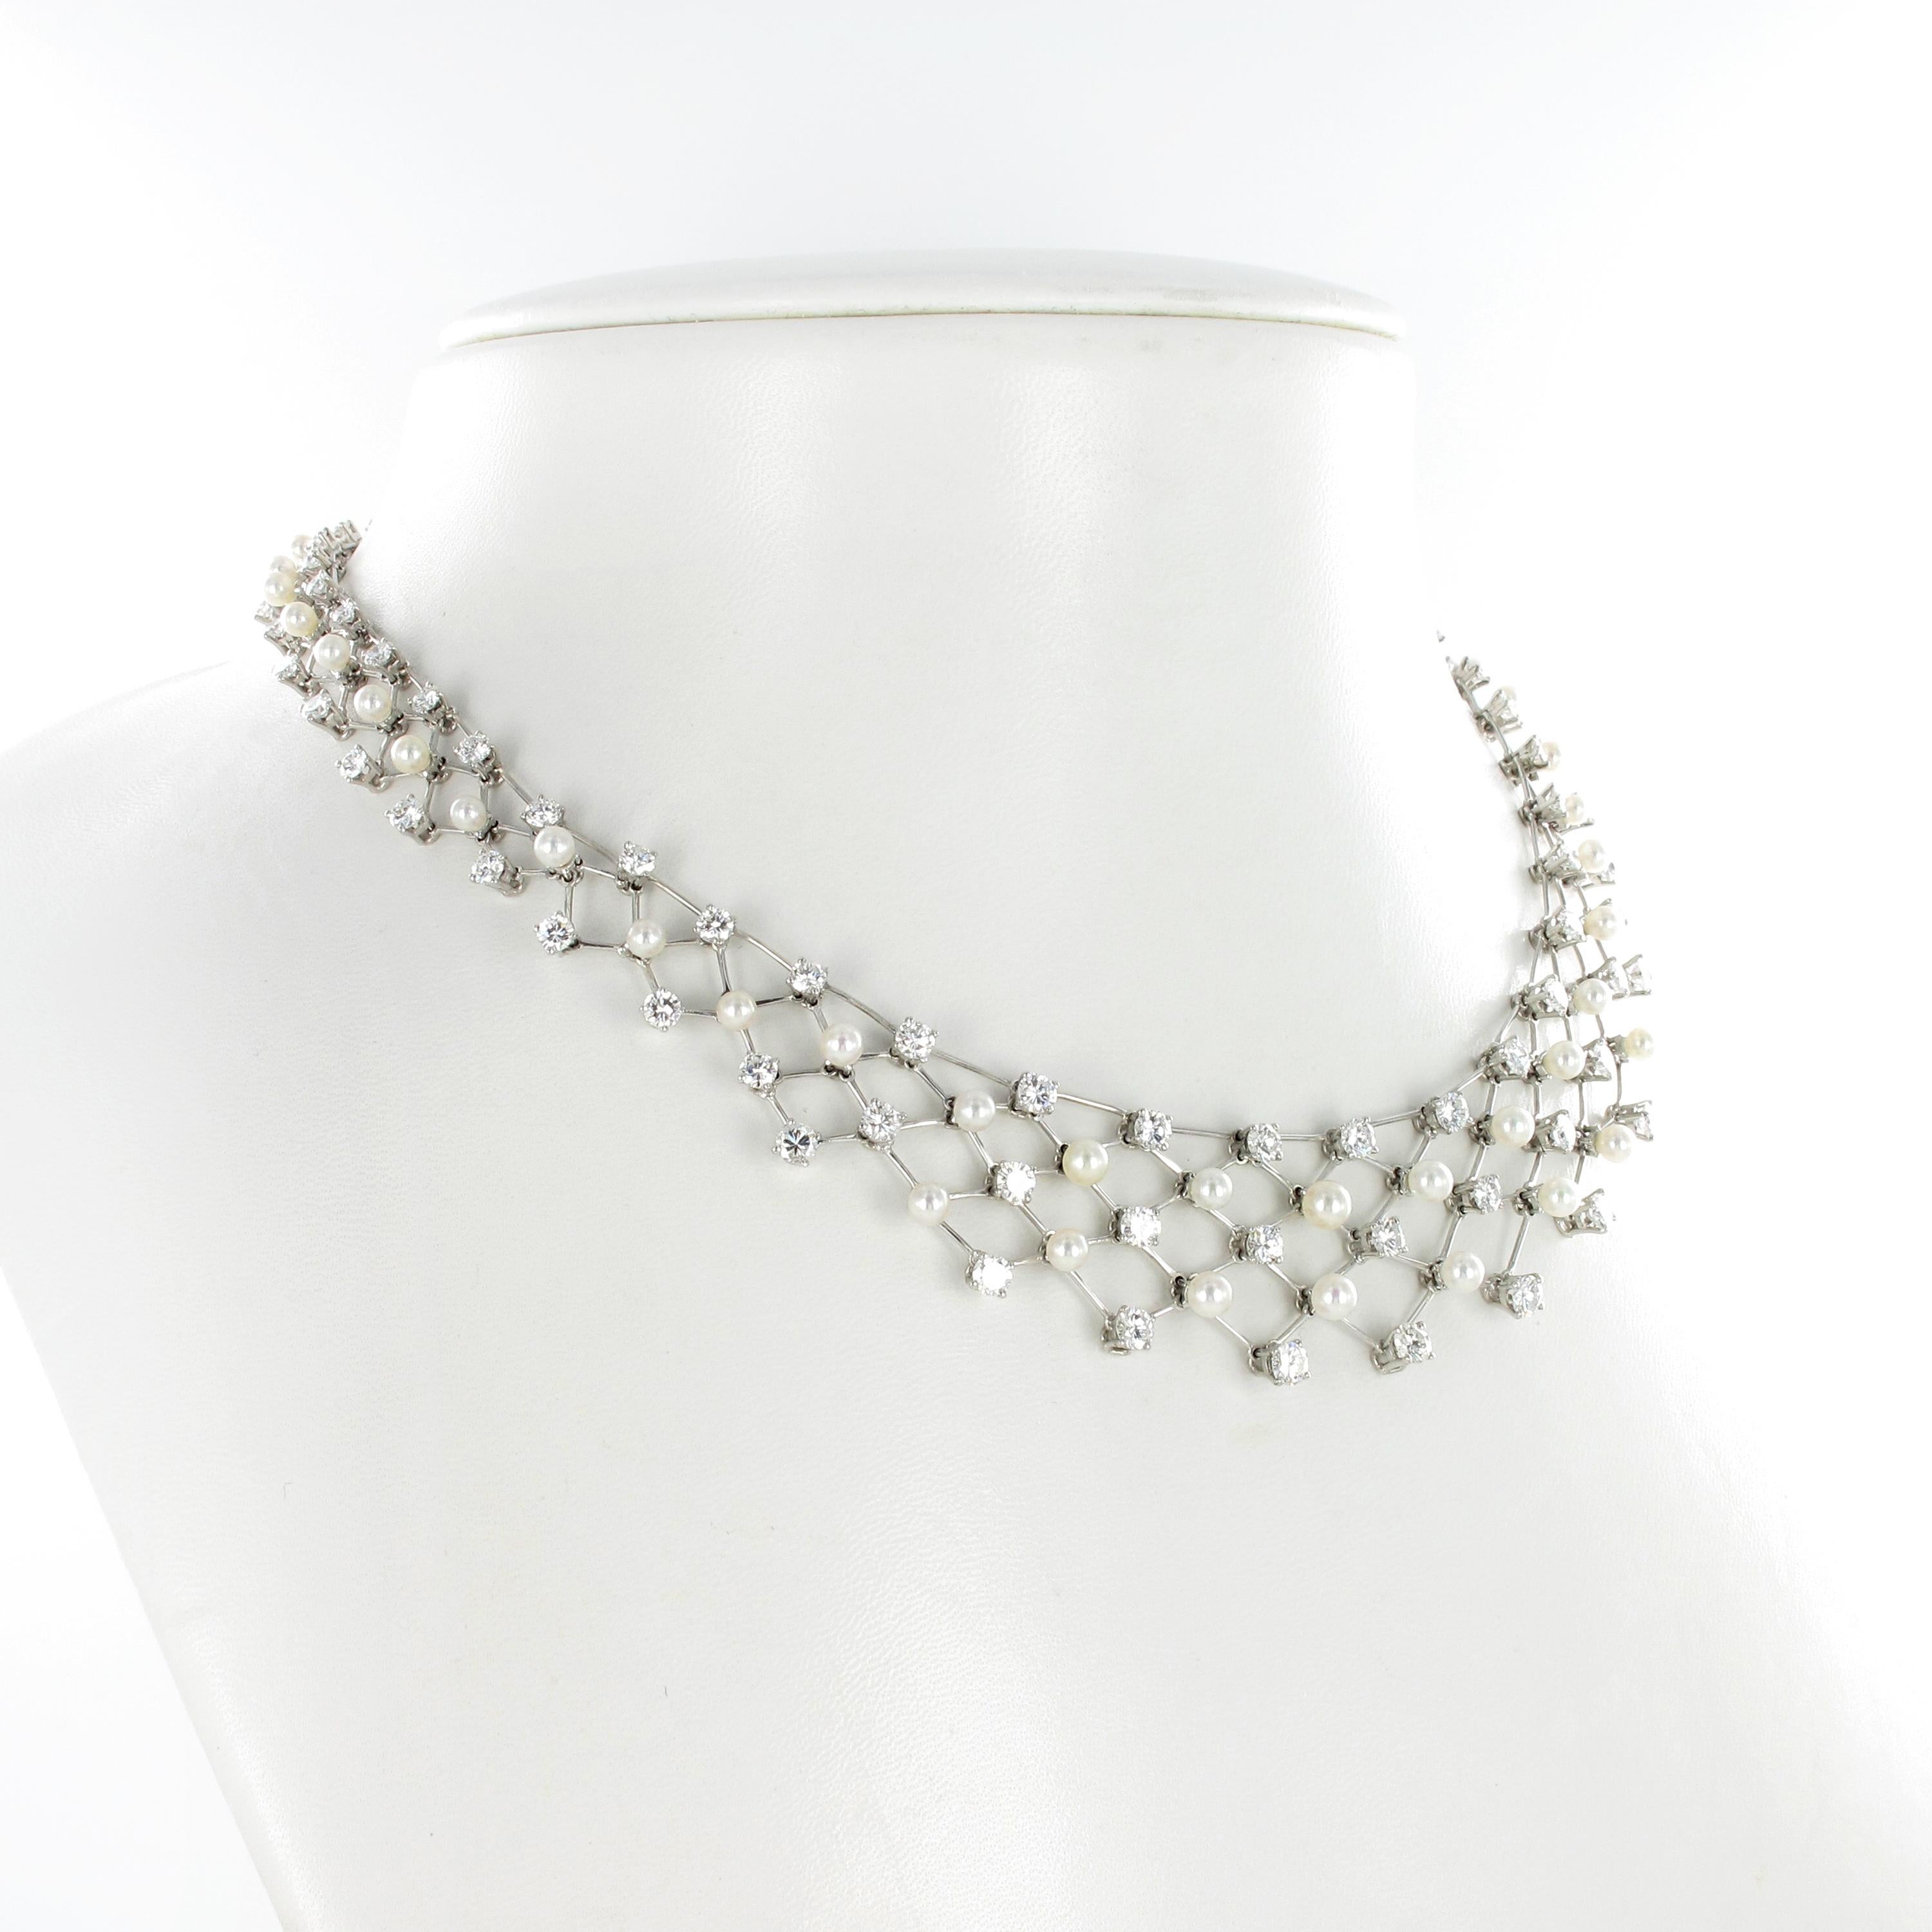 This delicate and flexible handcrafted platinum necklace is set with 95 brilliant-cut diamonds of G/H colour and vs clarity, total weight approximately 10.00 carats. Accented by 51 beautiful, round Akoya cultured pearls with superb luster, ranging